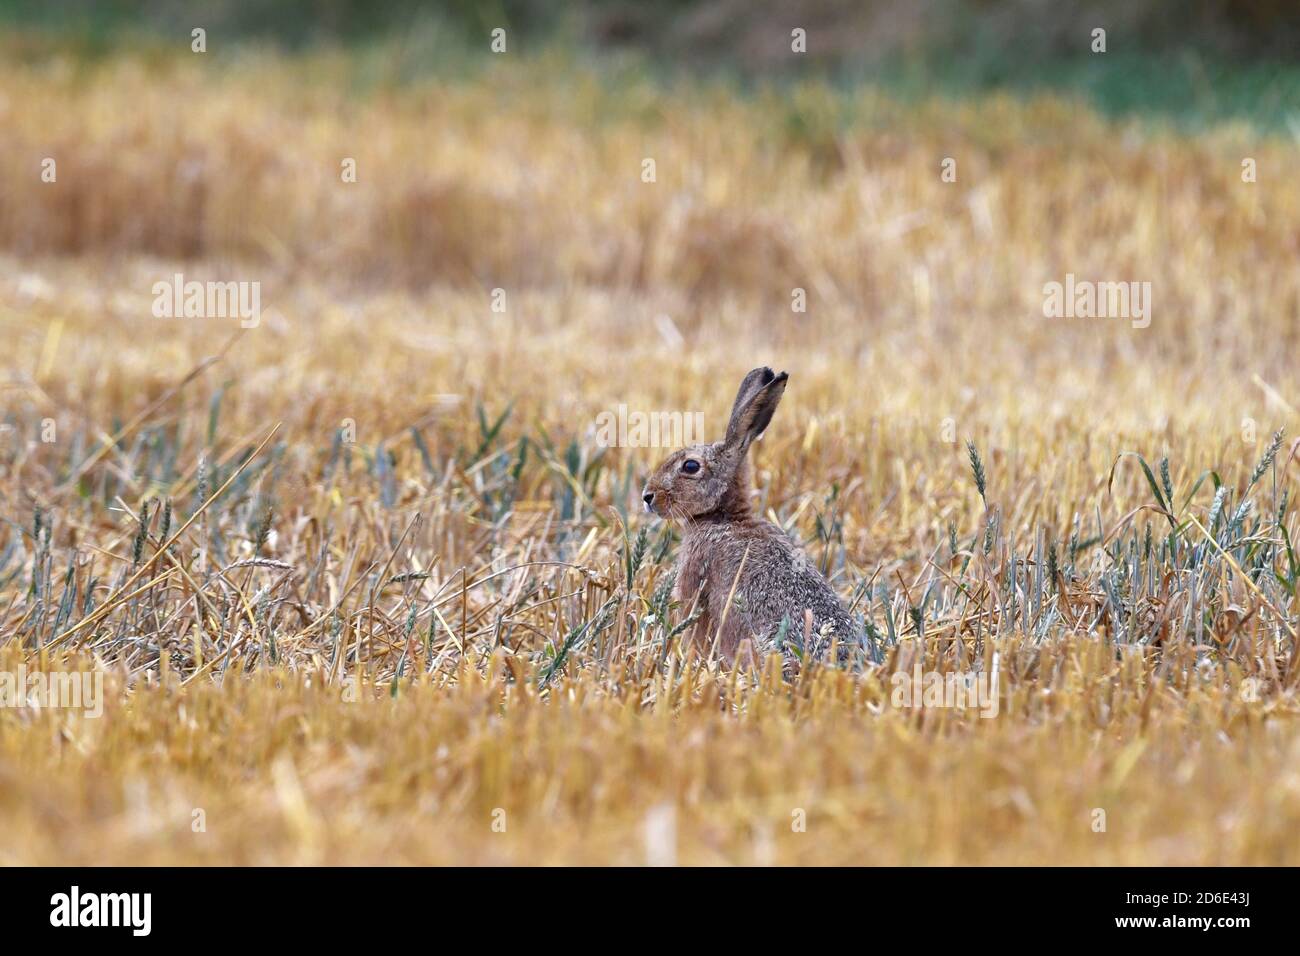 Hare, brown hare on stubble field Stock Photo